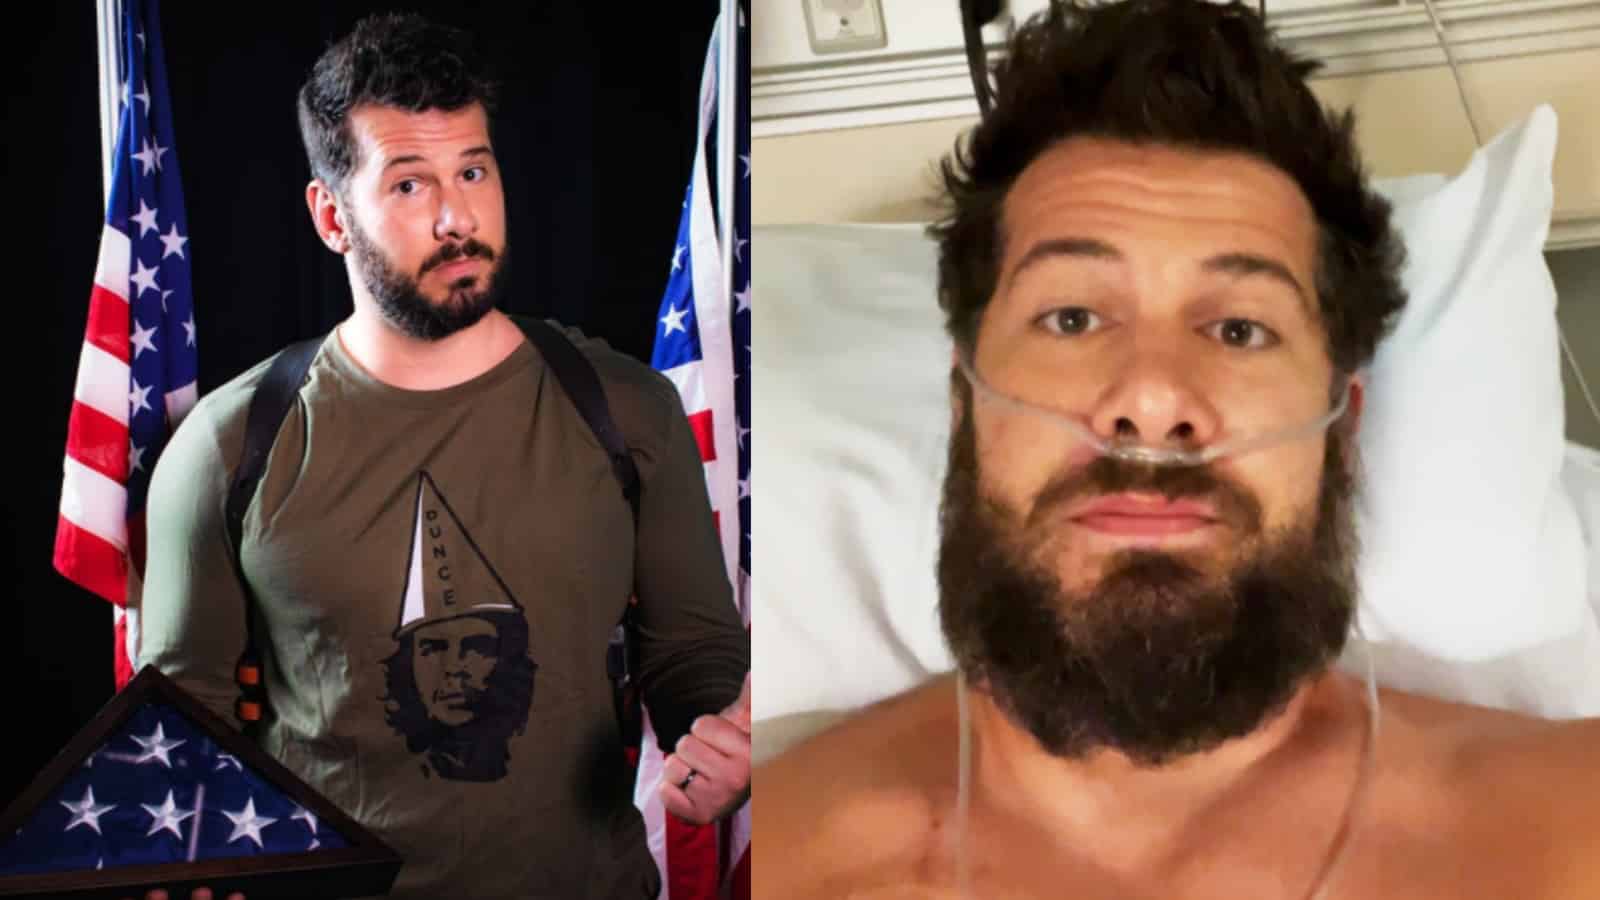 What happened to Steven Crowder? Podcaster hospitalized after “serious